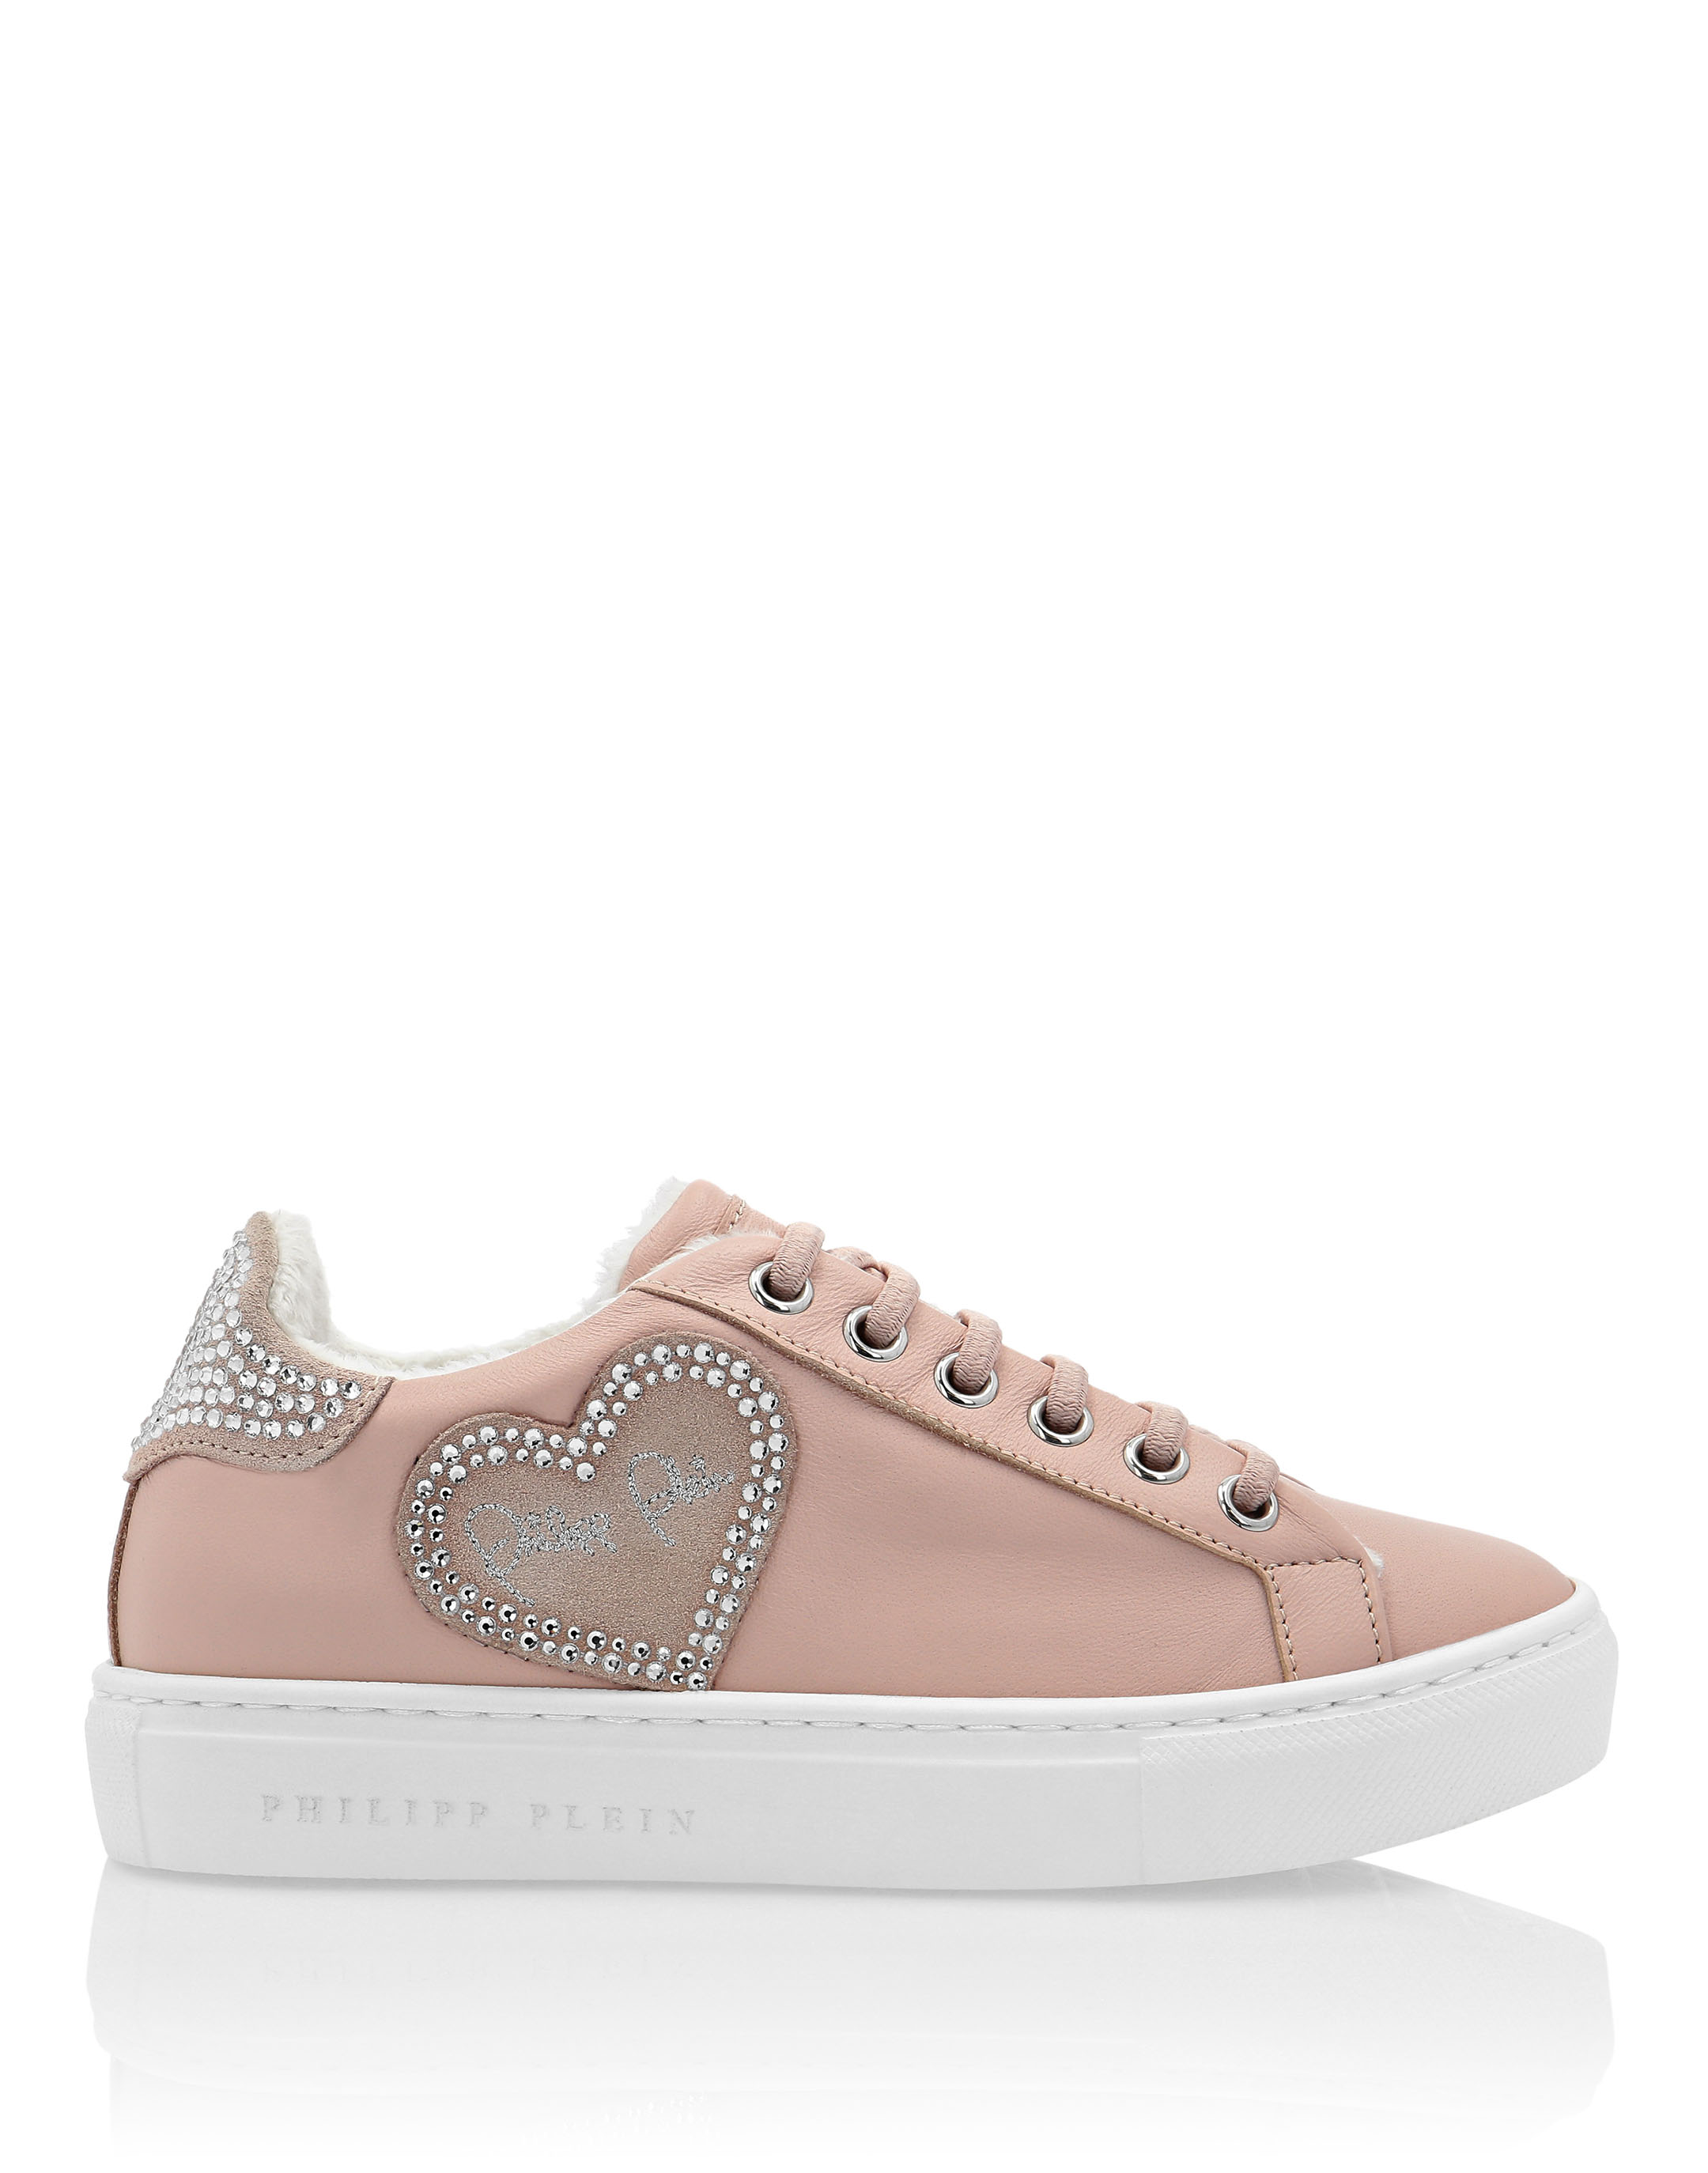 Lo-Top Sneakers Signature | Philipp Plein Outlet